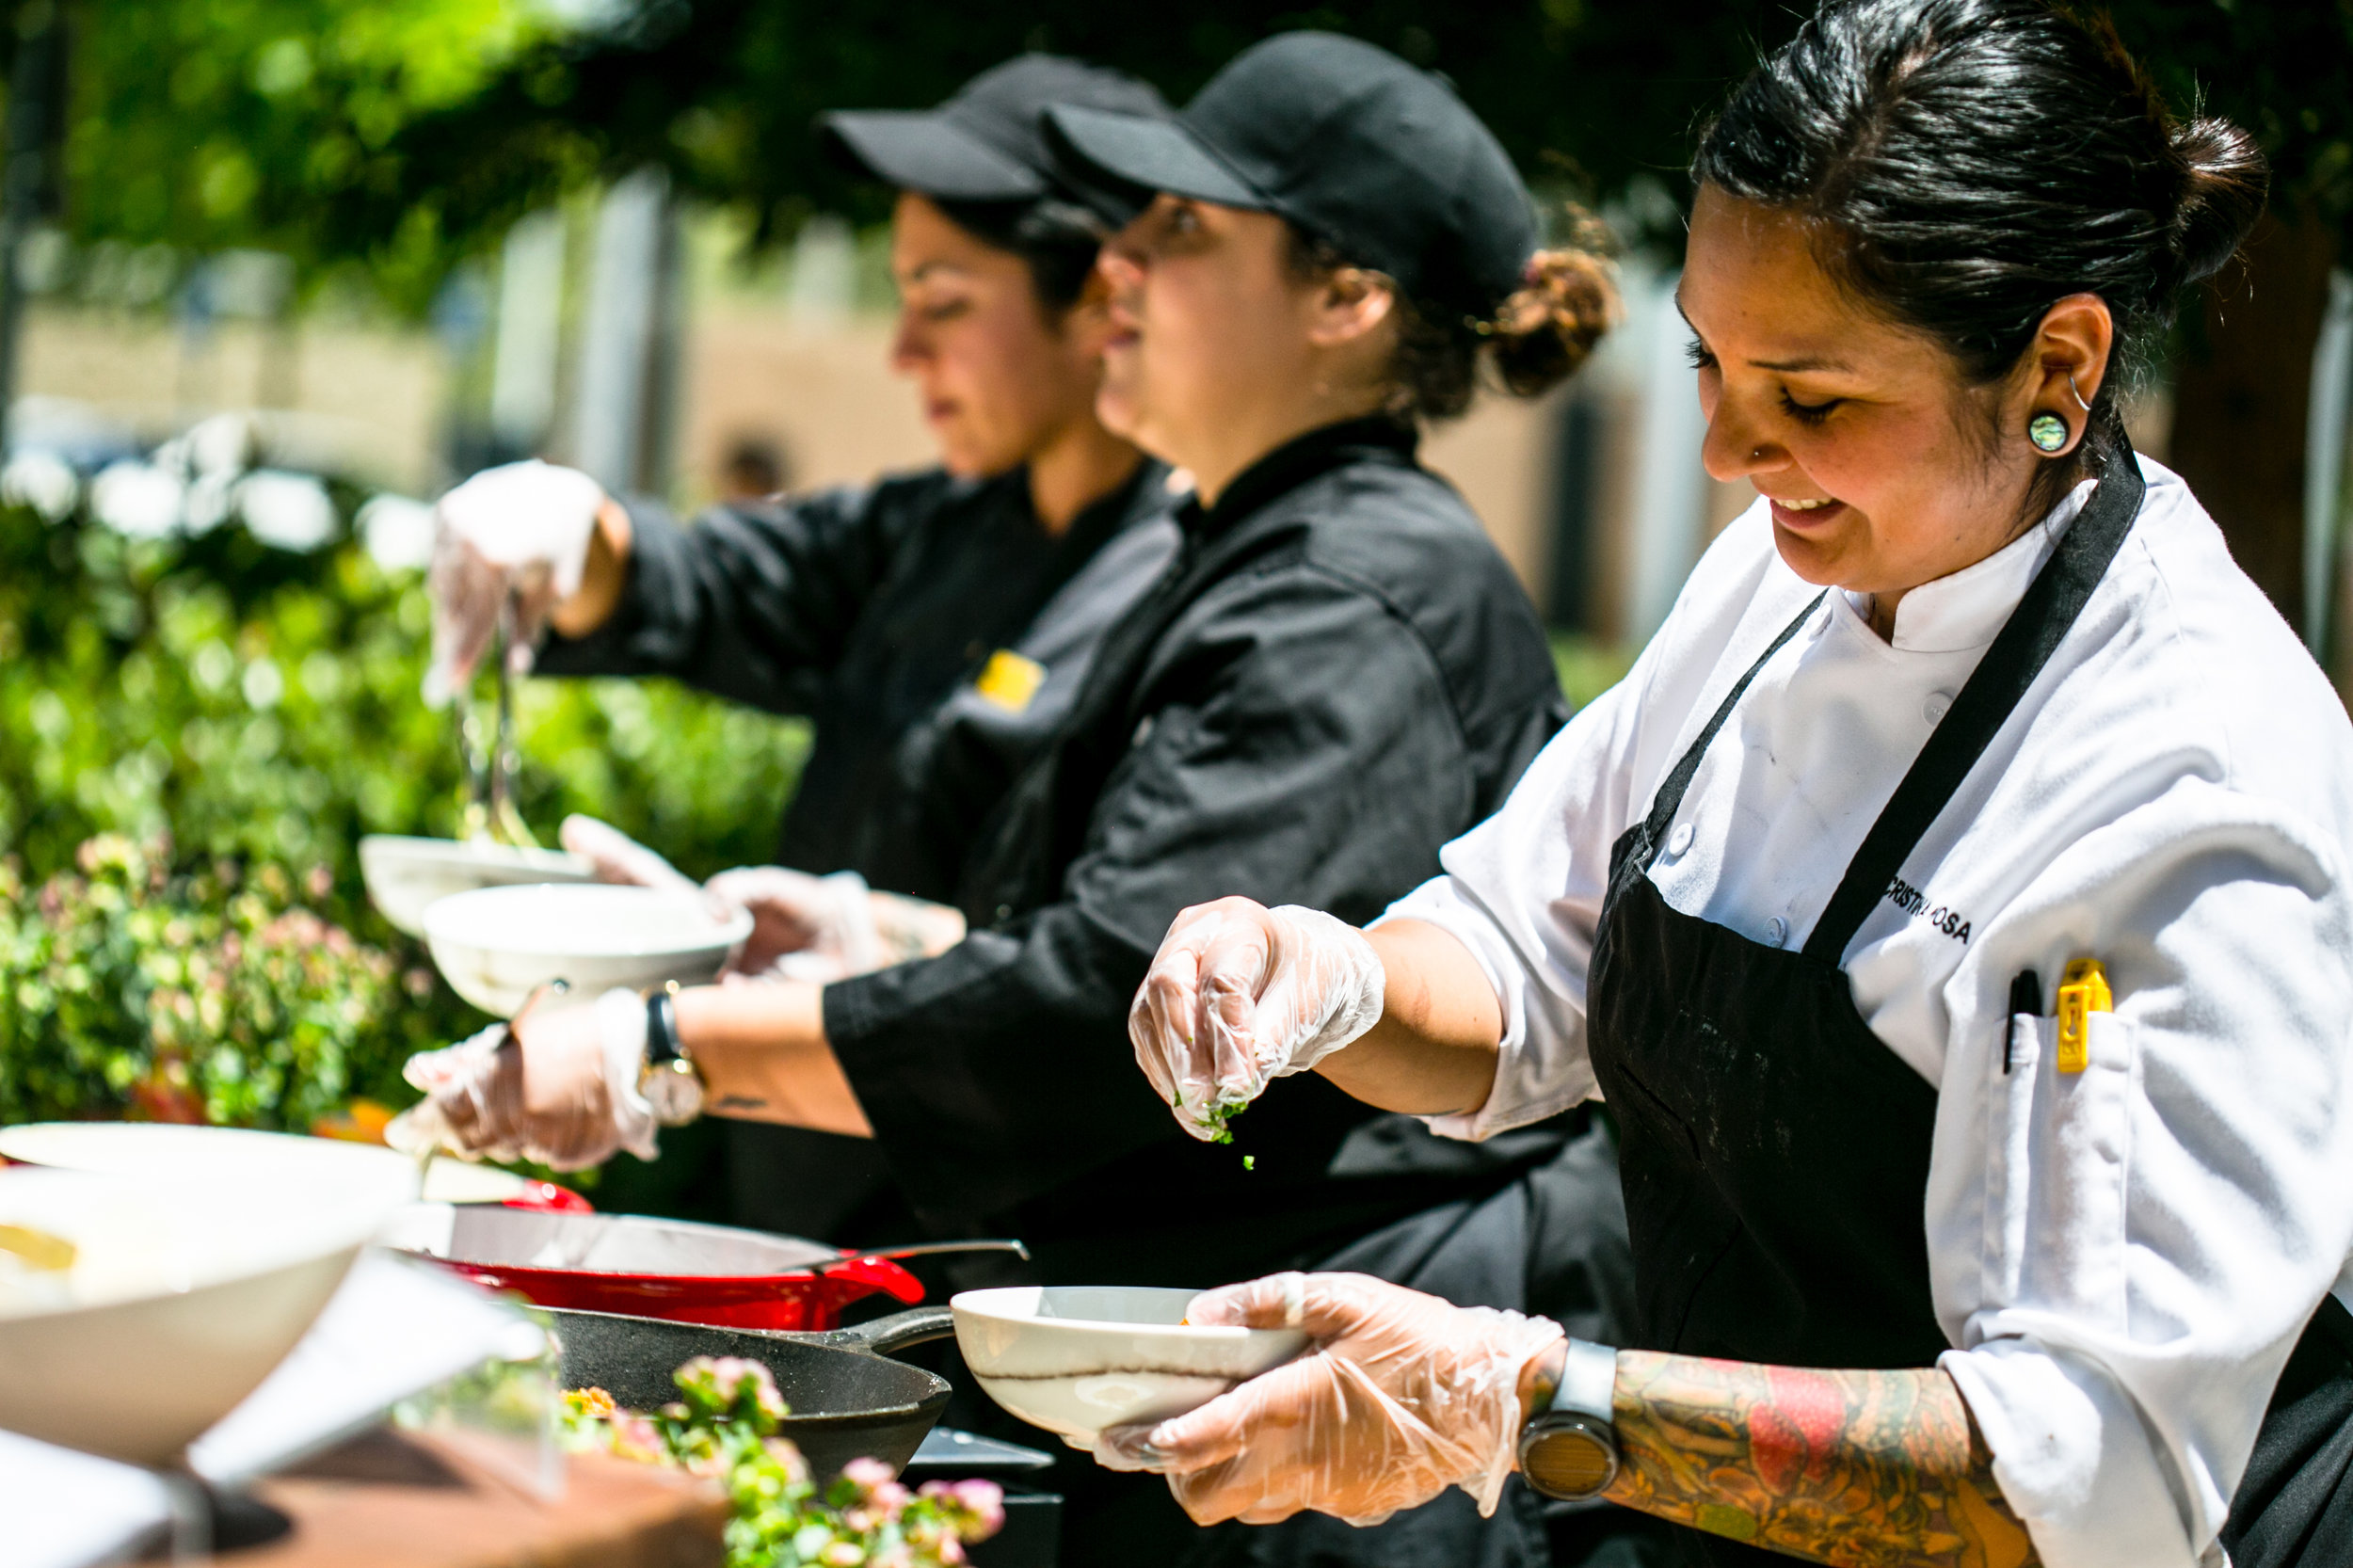 Catering staff from a facilities management company serving food outdoors